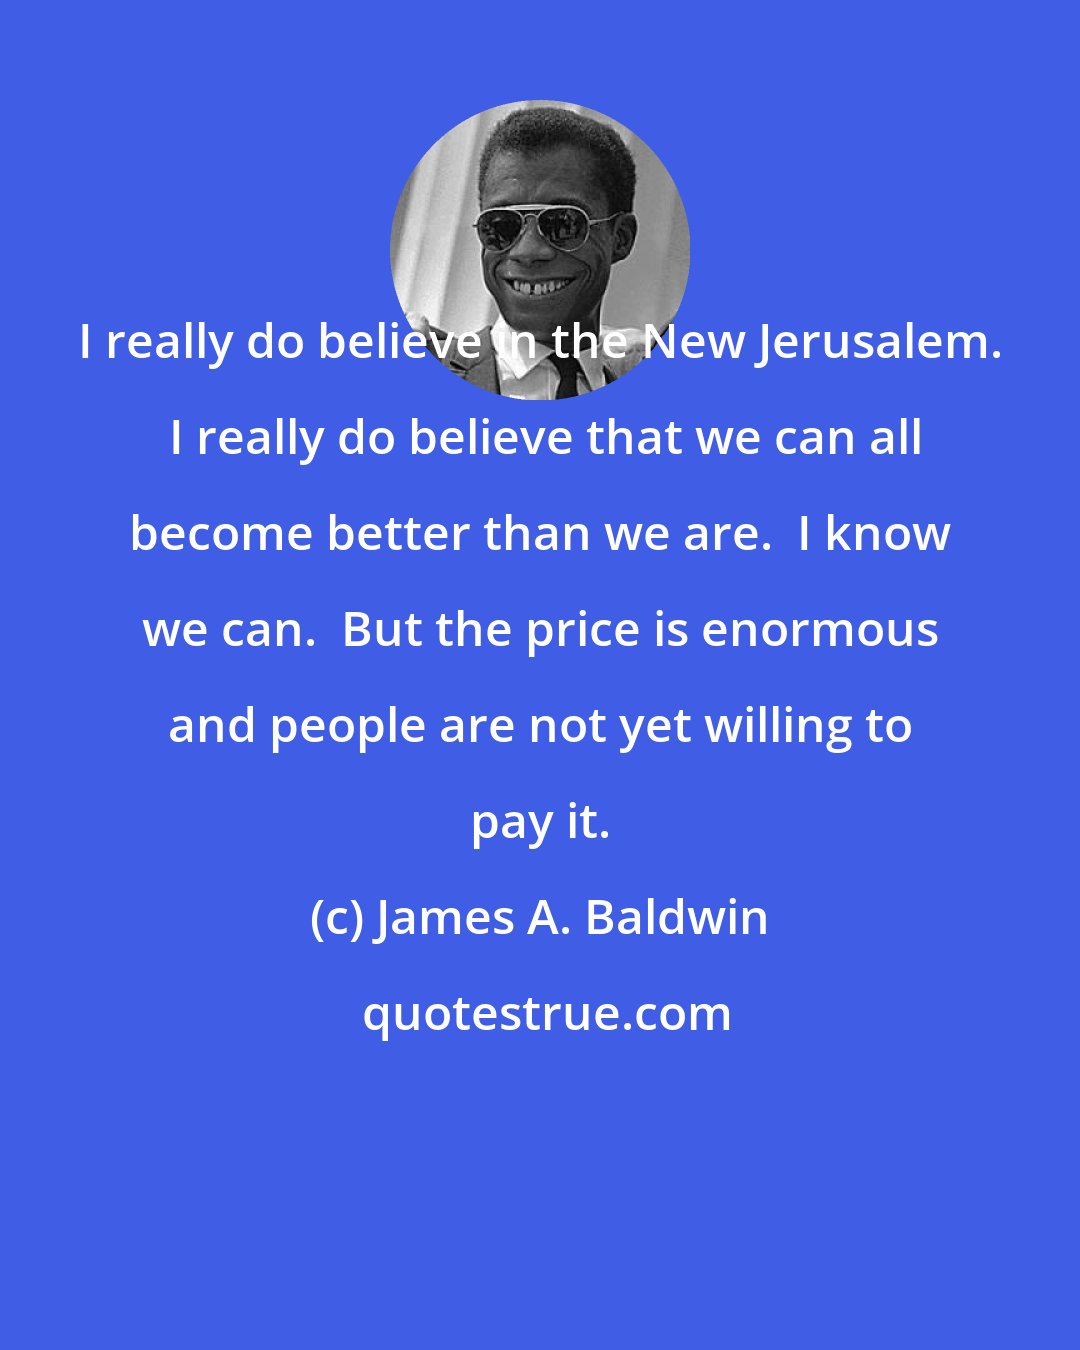 James A. Baldwin: I really do believe in the New Jerusalem.  I really do believe that we can all become better than we are.  I know we can.  But the price is enormous and people are not yet willing to pay it.